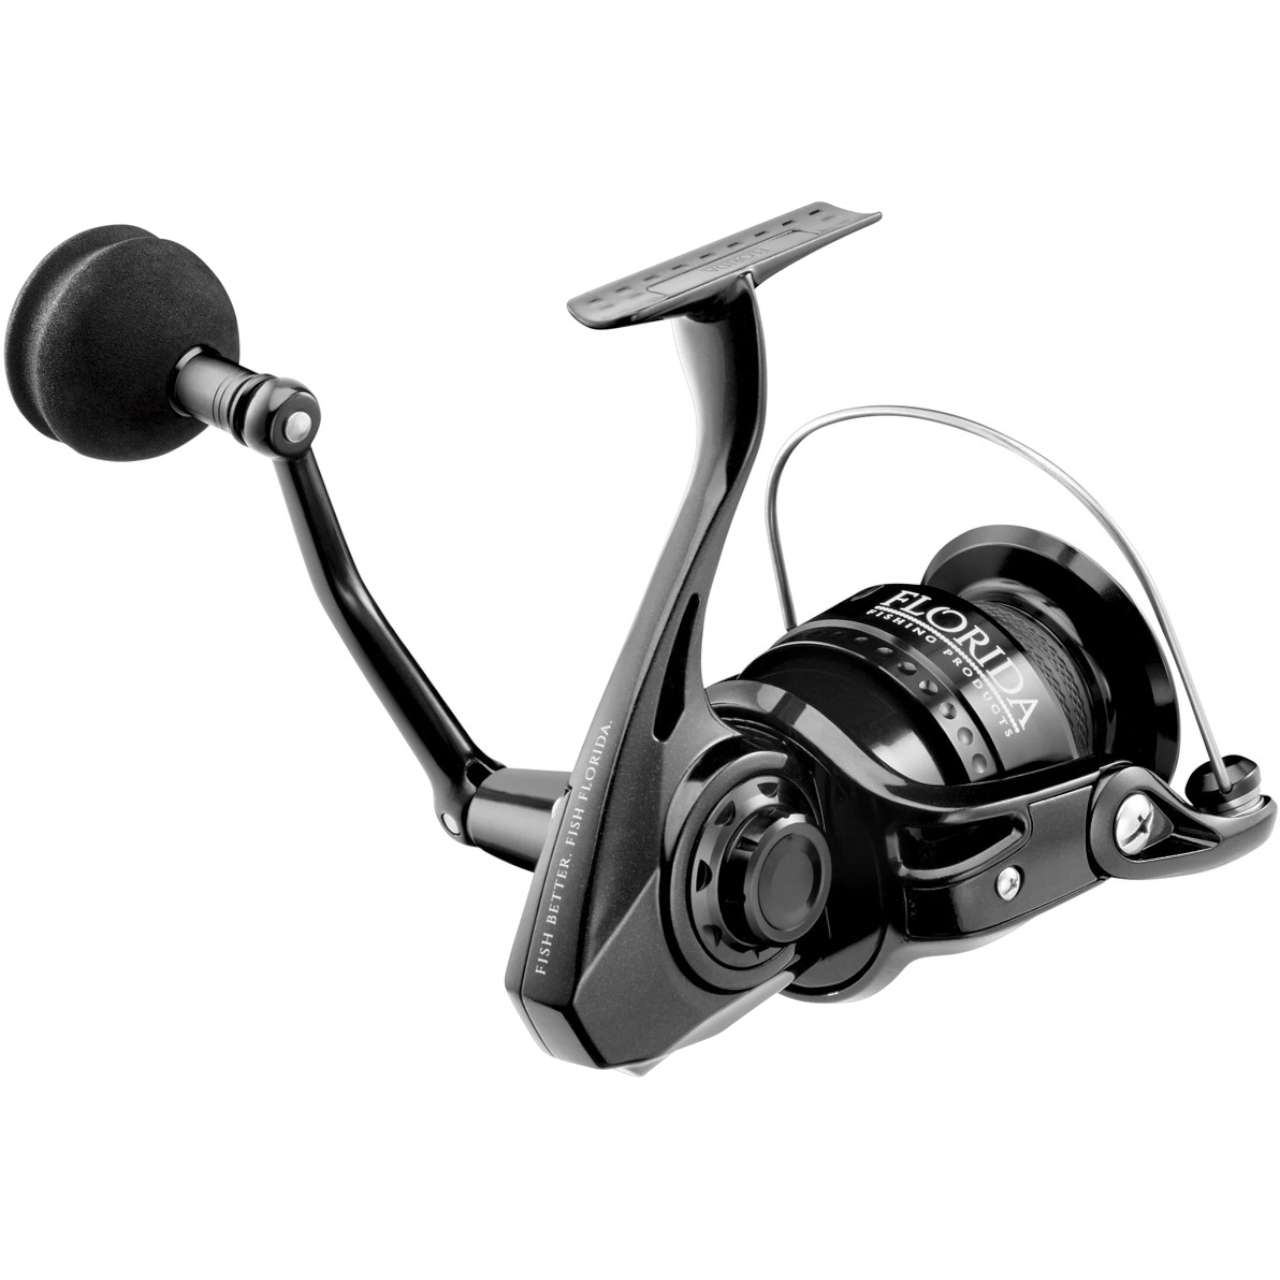 Reel - RR 6000 Big Fish Spin Reel. Smooth strong durable salt